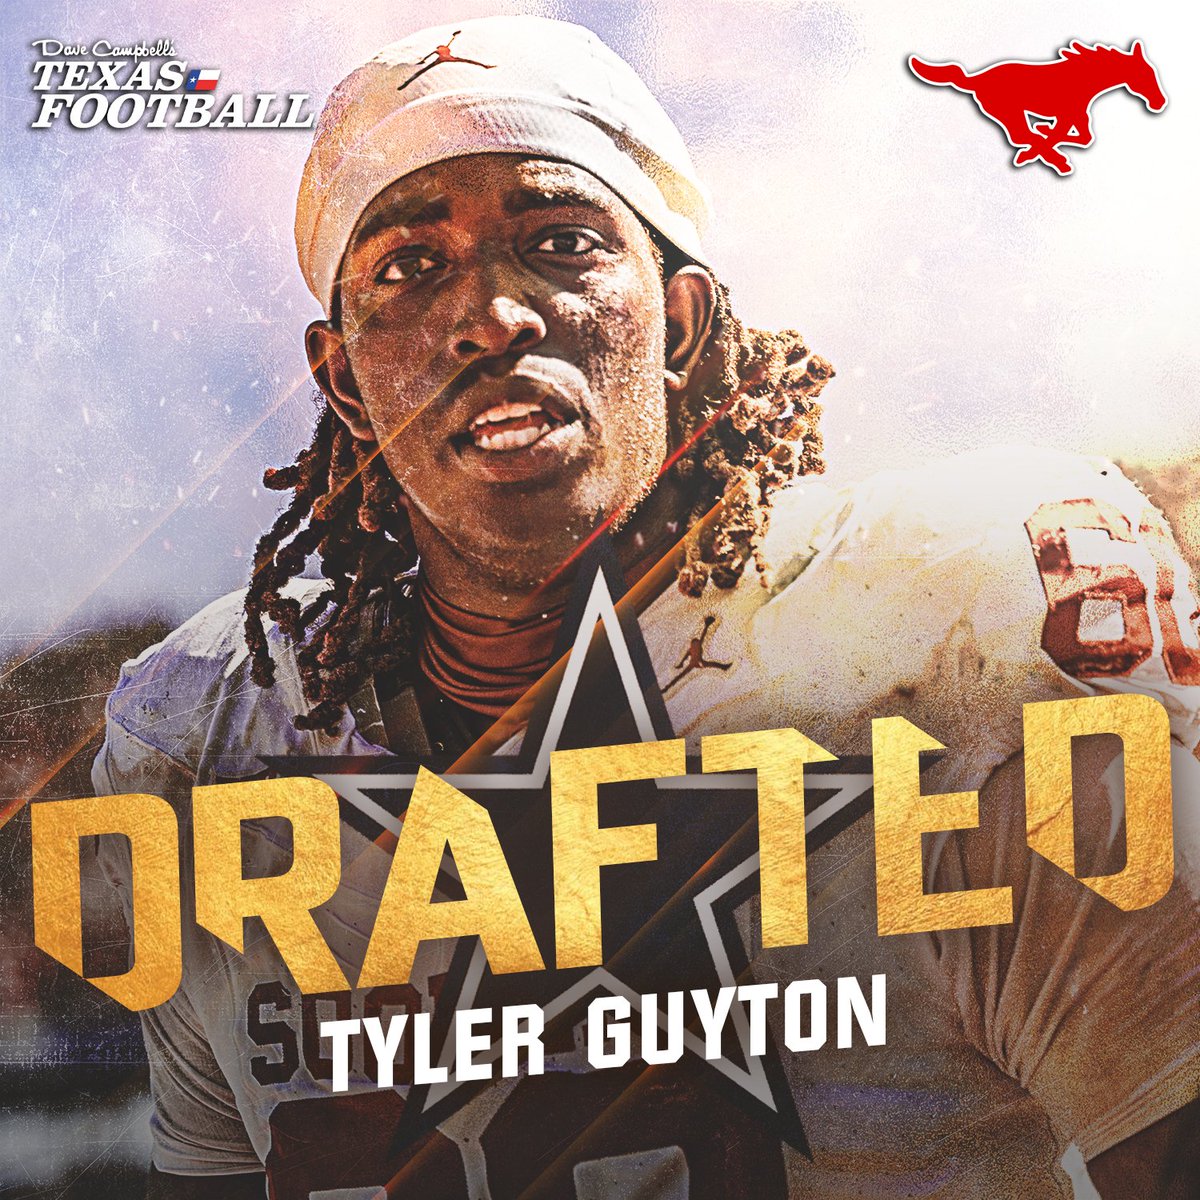 WAMM NATION ON THE MAP!! @ManorHSFootball product @TylerGuyton14 is headed to the @dallascowboys and back the Lone Star State. #WAMM Read more: texasfootball.com/article/2024/0…